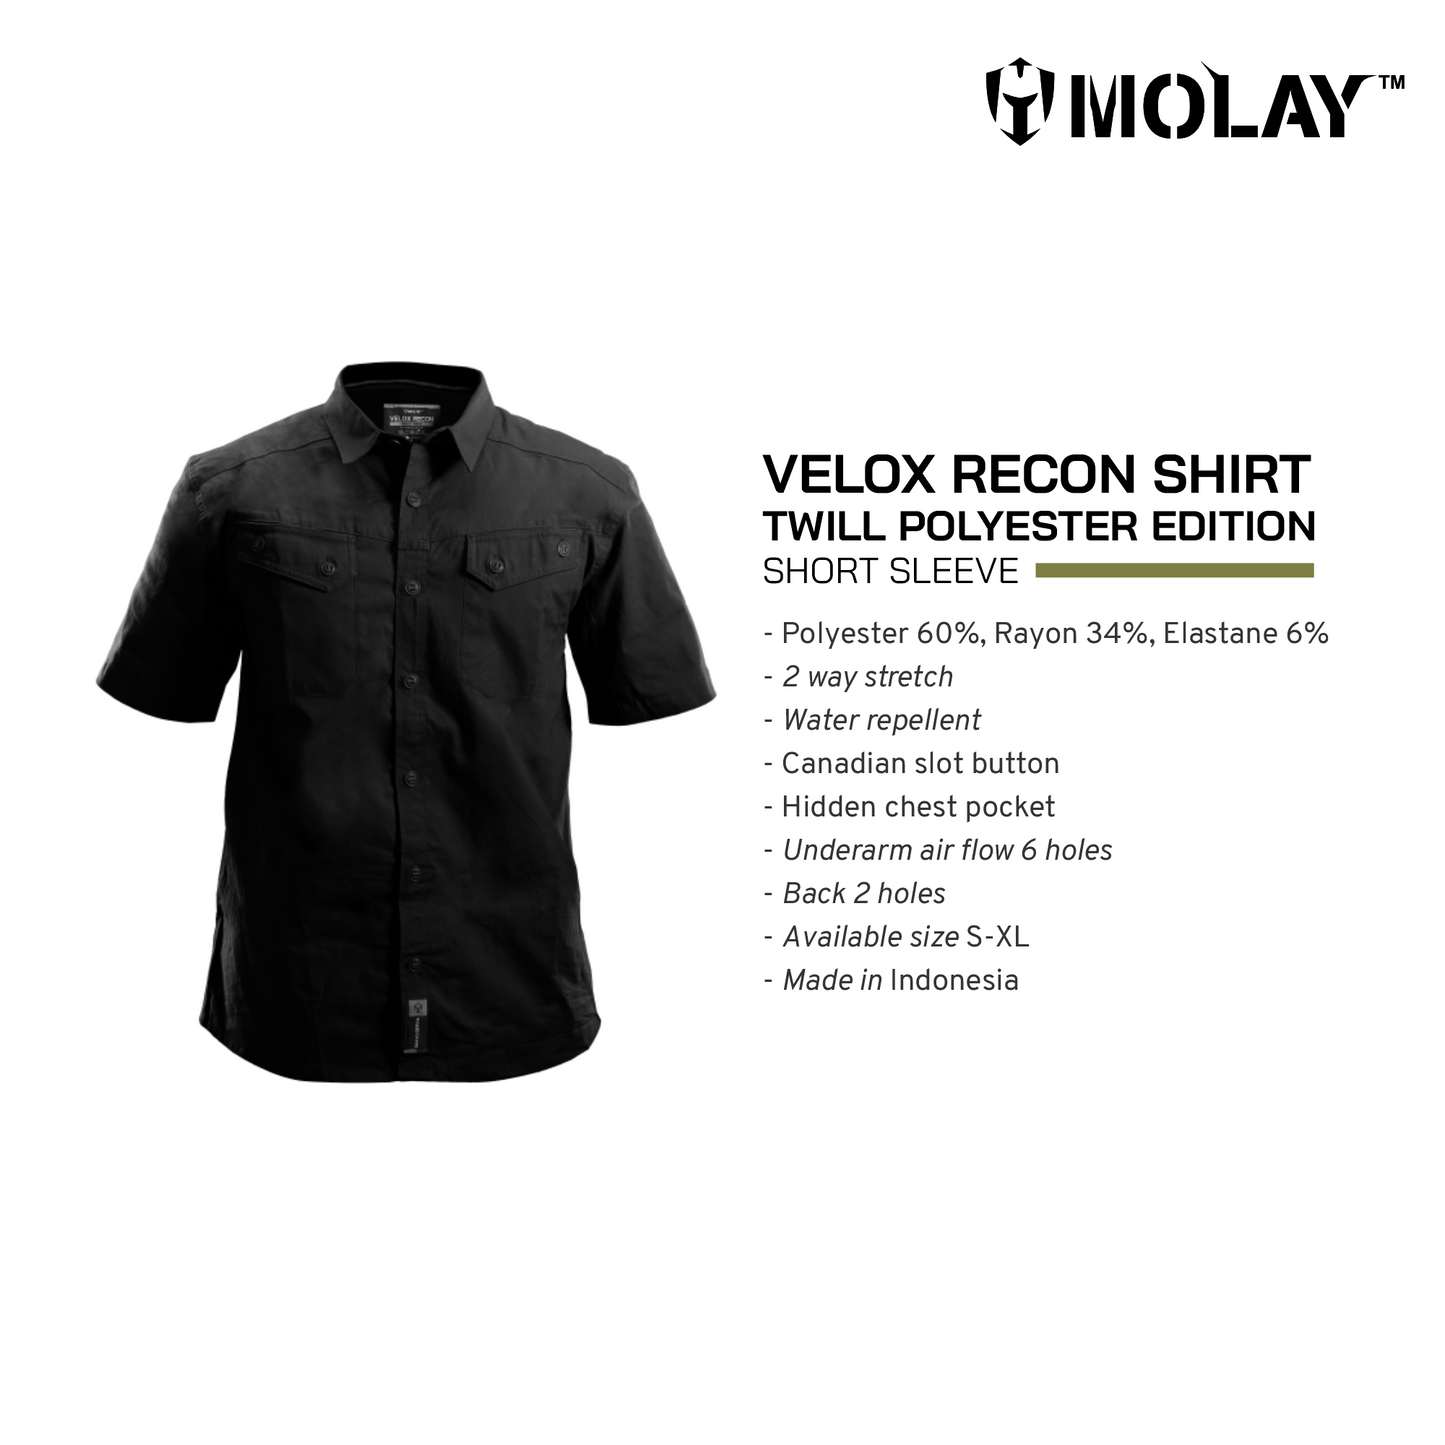 Molay™️ Velox Recon Shirt Twill Polyester Edition - Short Sleeve